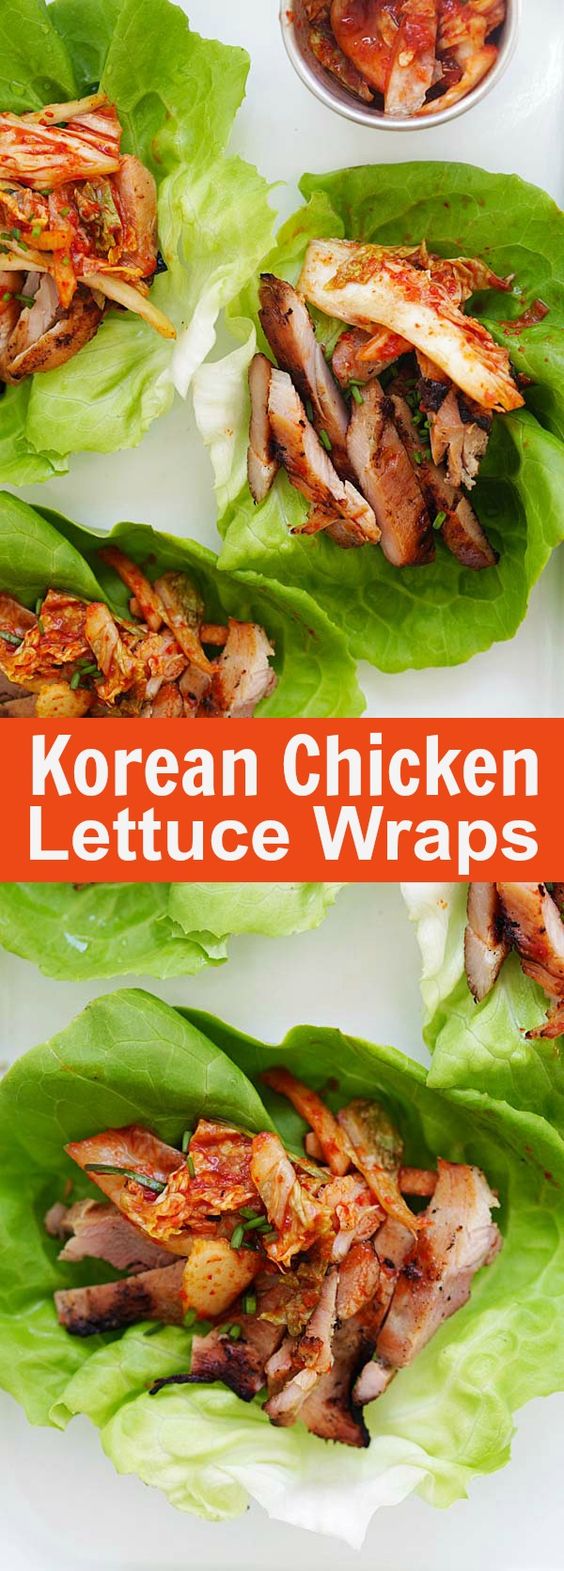 Korean BBQ Chicken Kimchi Lettuce Wraps - refreshing lettuce wraps with spicy Korean grilled chicken and kimchi. So delicious you'll want more | rasamalaysia.com